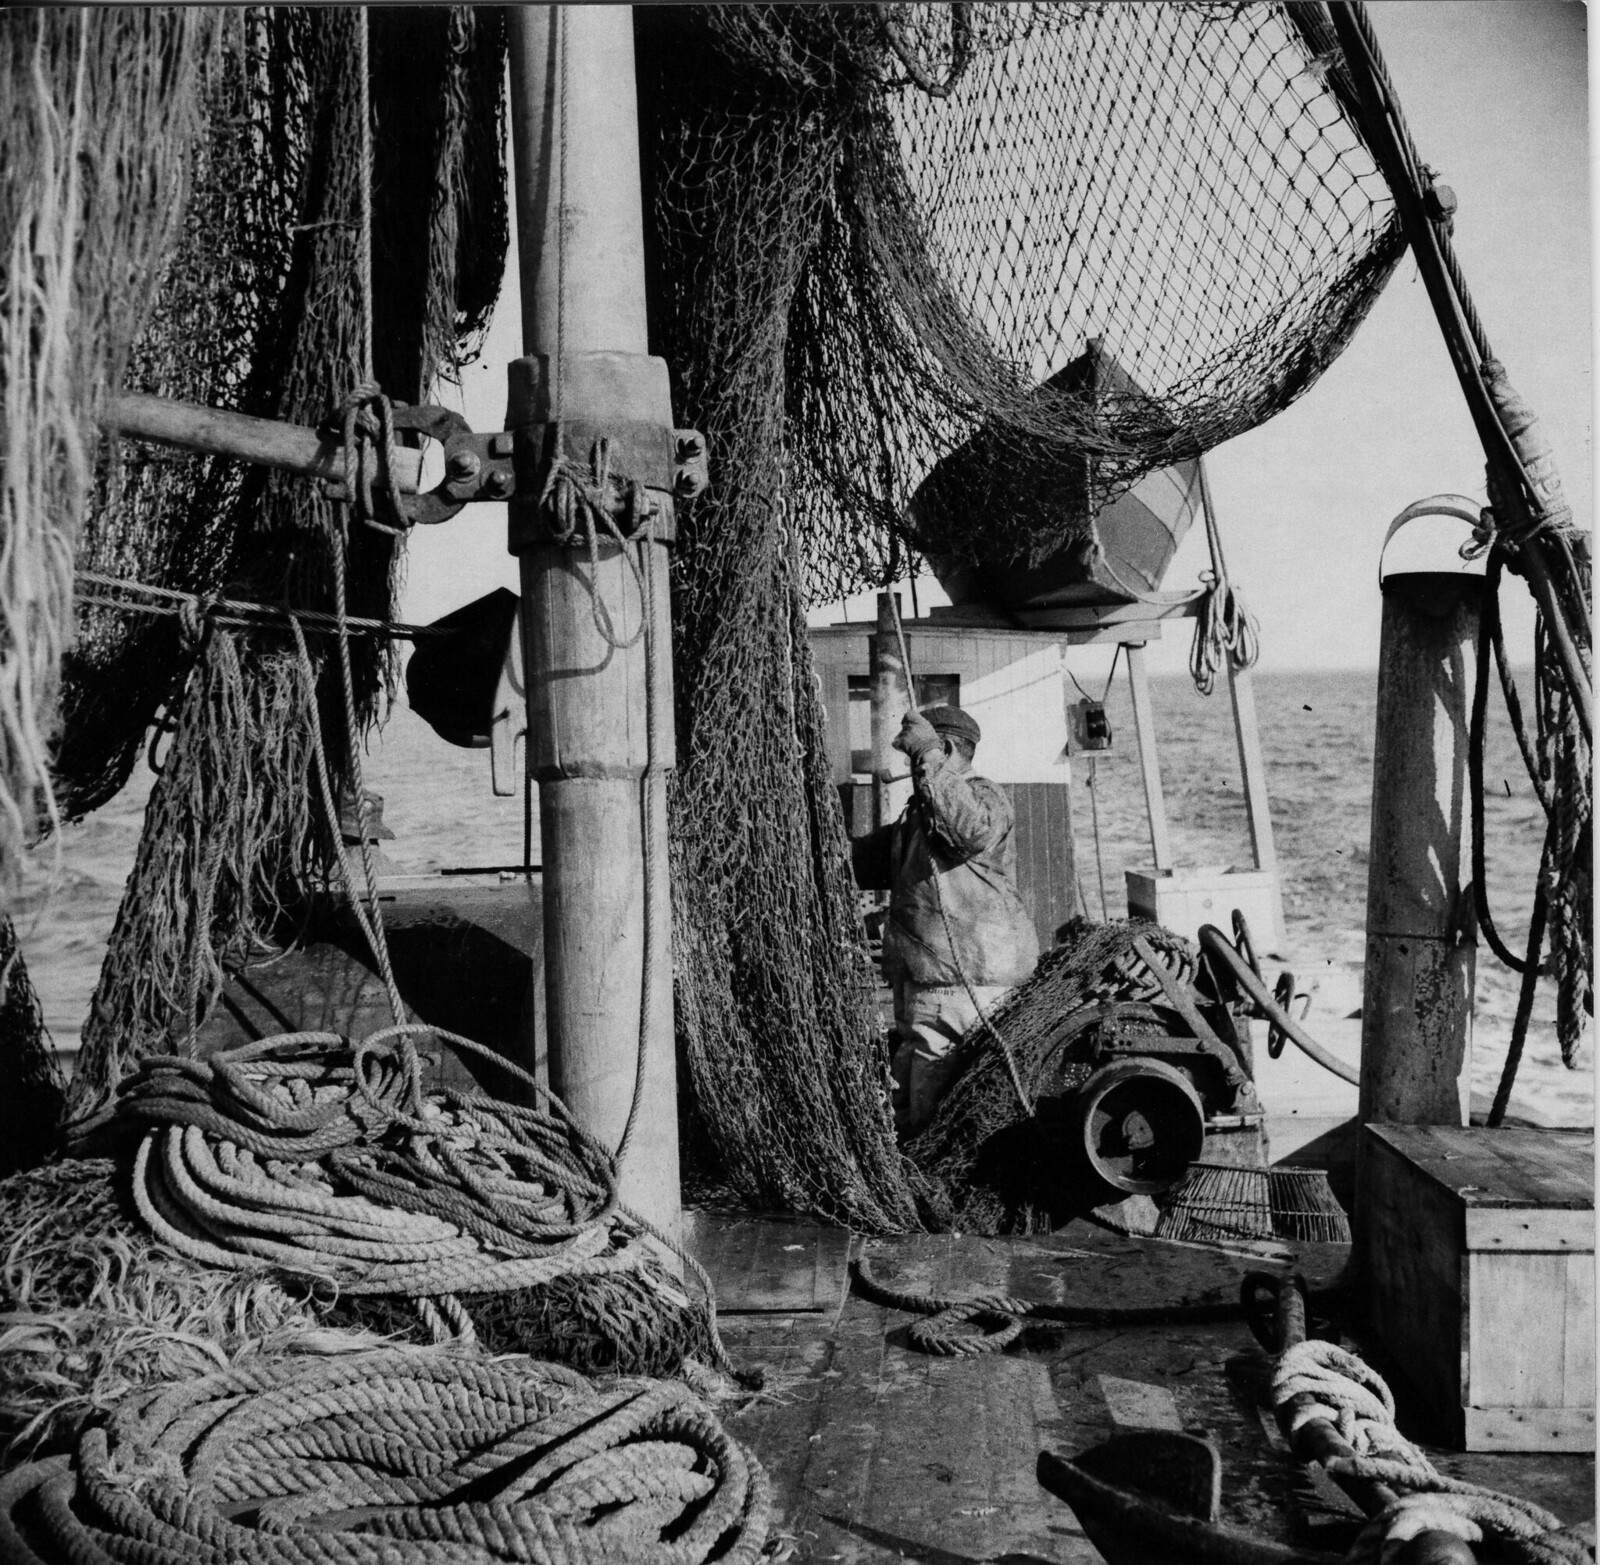 Aboard the Frances and Marion, a Portuguese drag trawler